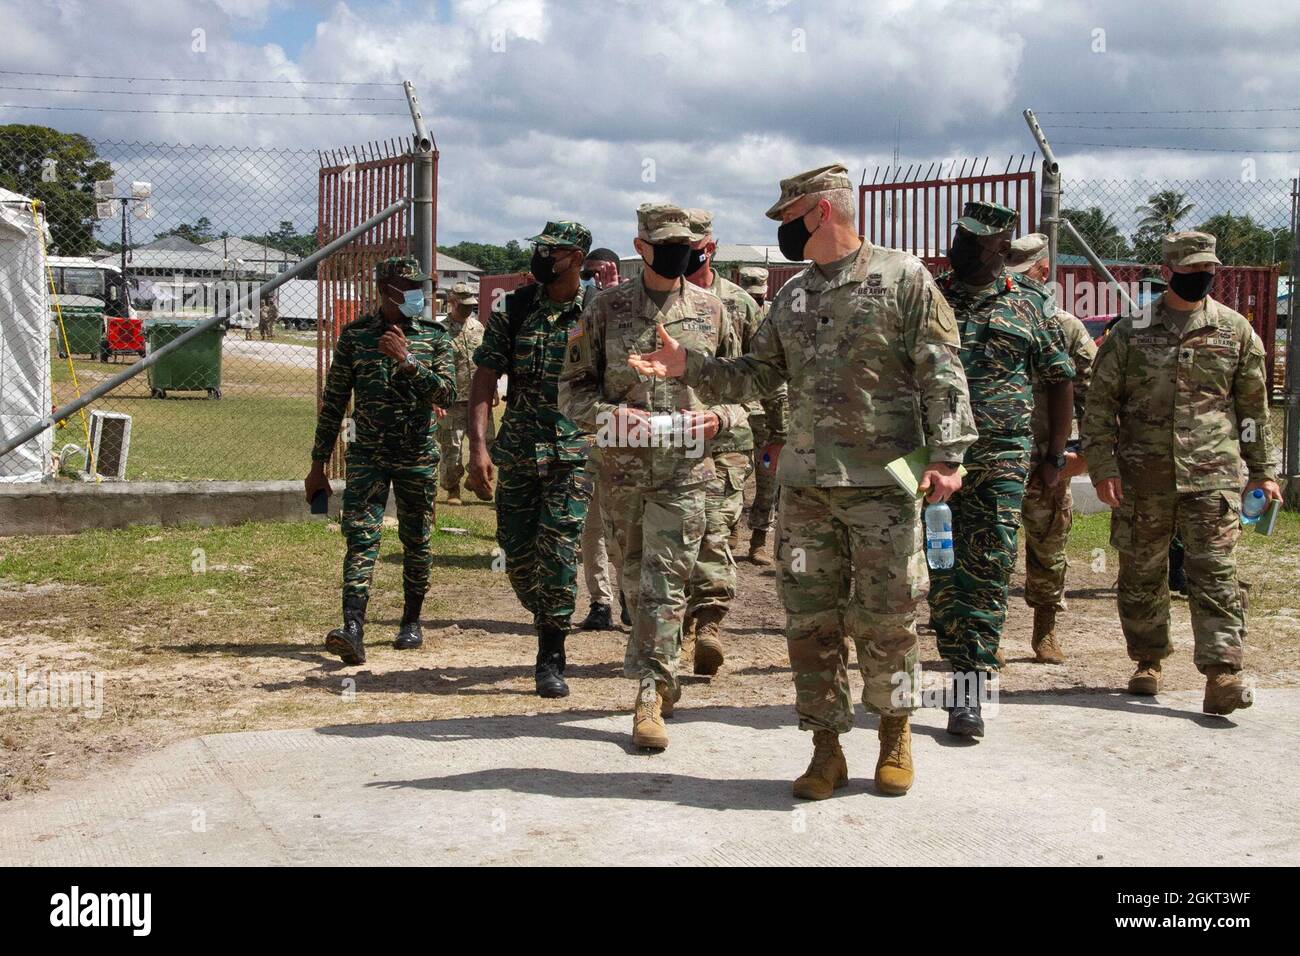 Maj. Gen. Rafael A. Ribas, deputy commander for mobilization and reserve affairs, U.S. Southern Command, receives a tour from Lt. Col. Timothy Starke, commander of 75th Troop Command, Kentucky National Guard during Tradewinds 21 at Camp Stephenson, Guyana, June 24, 2021. Tradewinds 21 is a U.S. Southern Command (SOUTHCOM) sponsored Caribbean security-focused exercise in the ground, air, sea, and cyber domains; working with partner nations to conduct joint, combined, and interagency training, focused on increasing regional cooperation and stability. Stock Photo